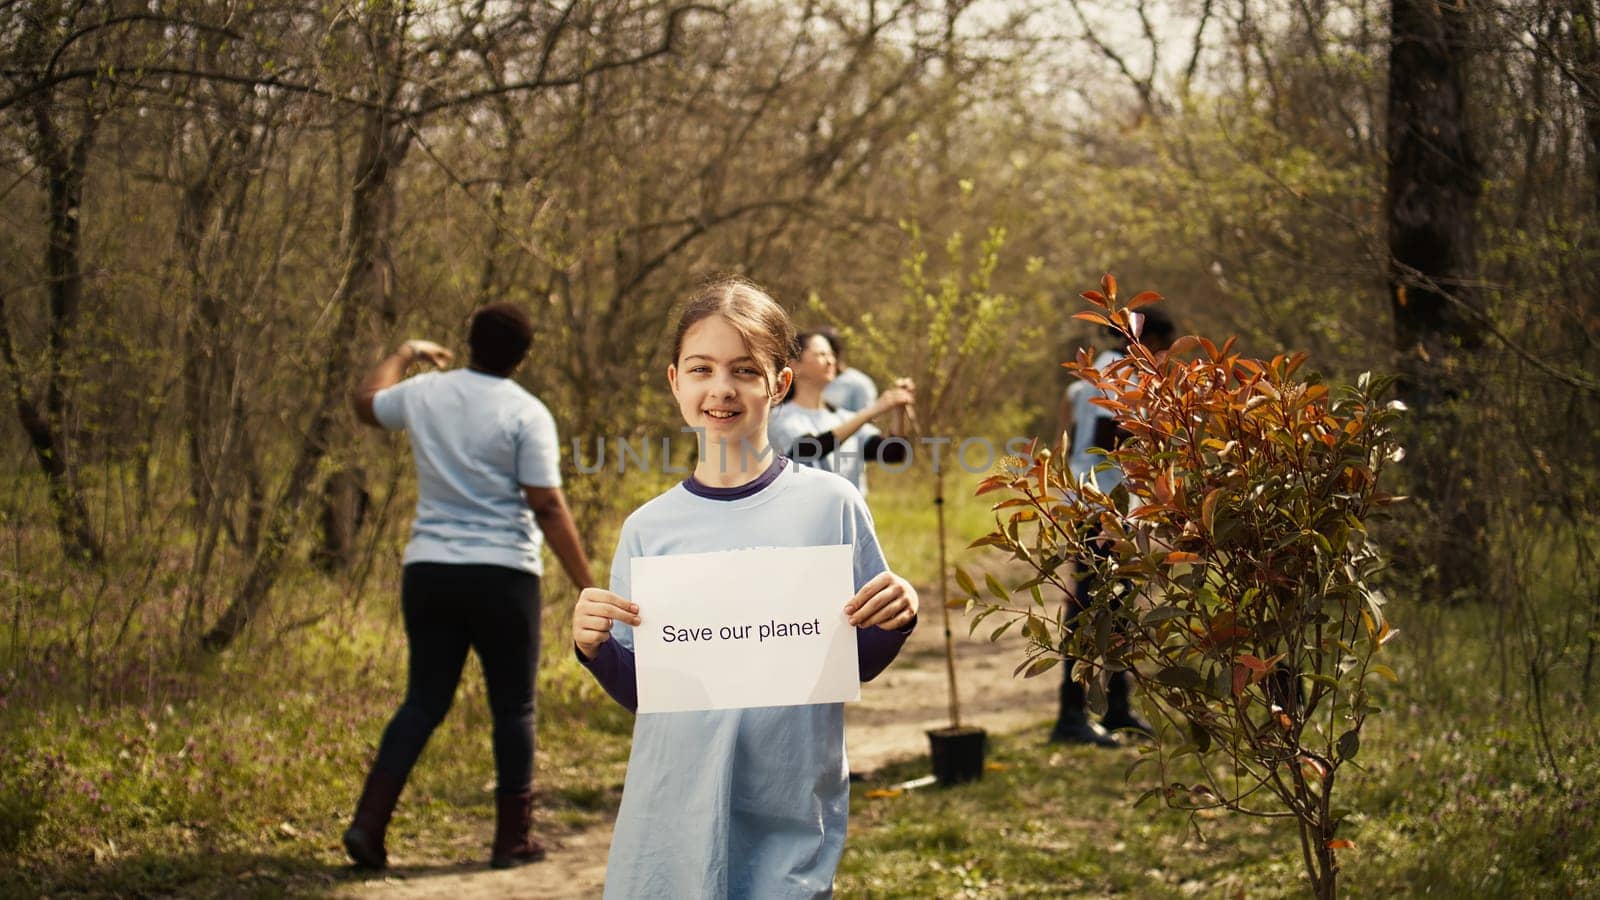 Portrait of sweet girl with save our planet poster against pollution and illegal dumping, volunteering to restore and preserve nature in the forest. Little child shows awareness sign. Camera B.